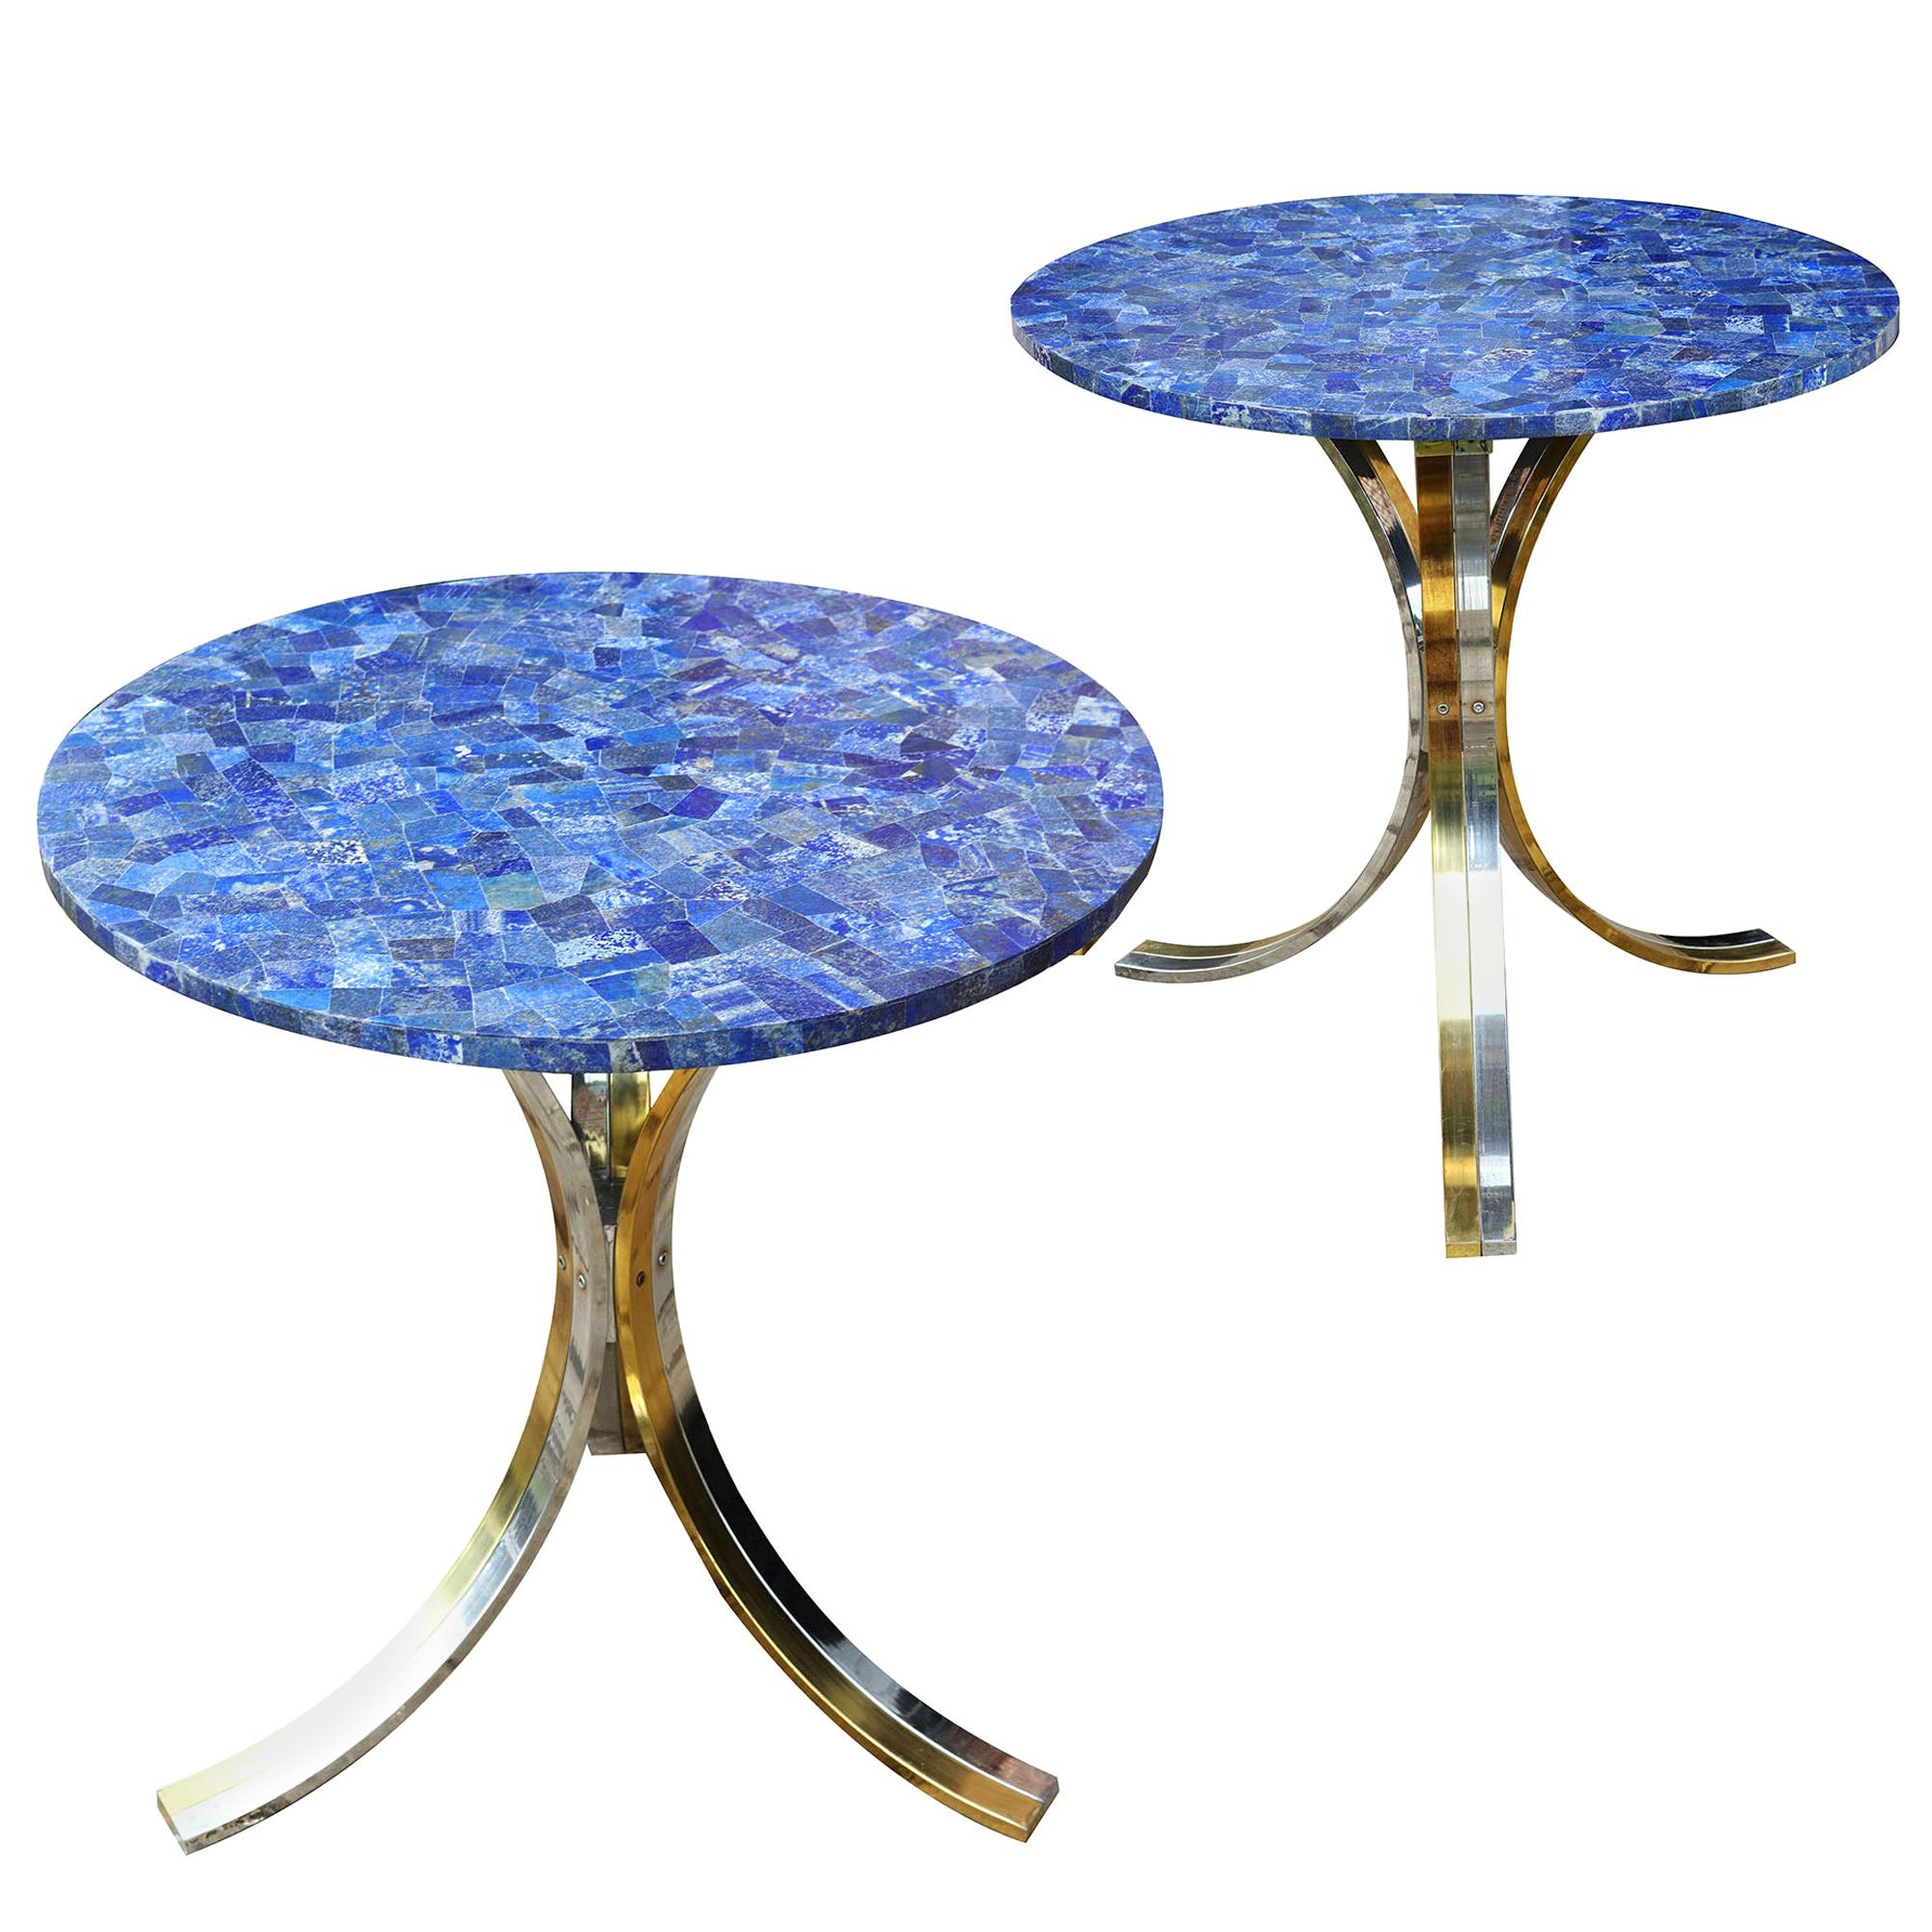 Midcentury Polished Chrome and Brass End Tables Attributed to Willy Rizzo, Pair